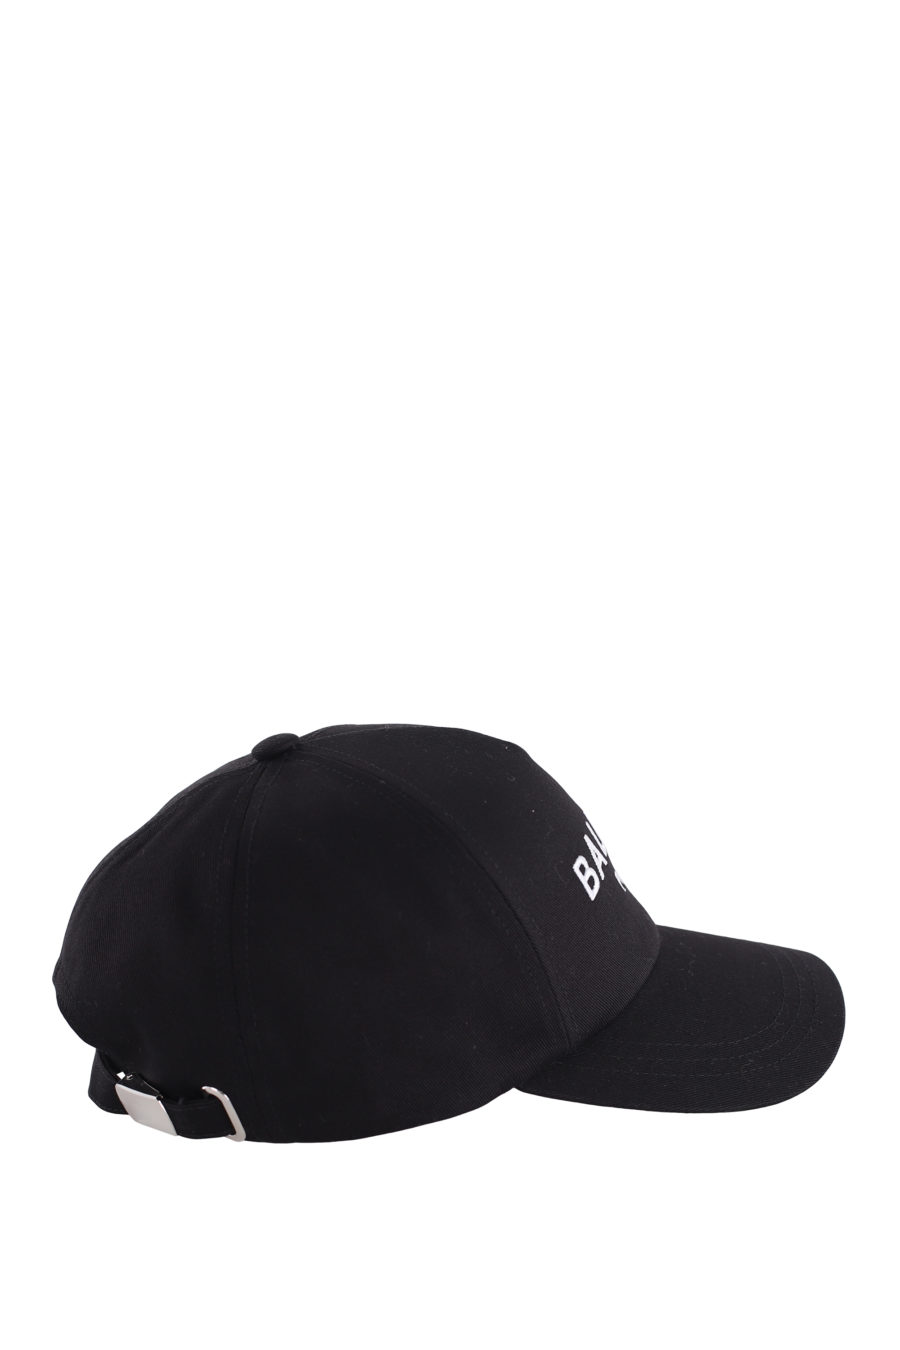 Black cap with embroidered logo - IMG 7261